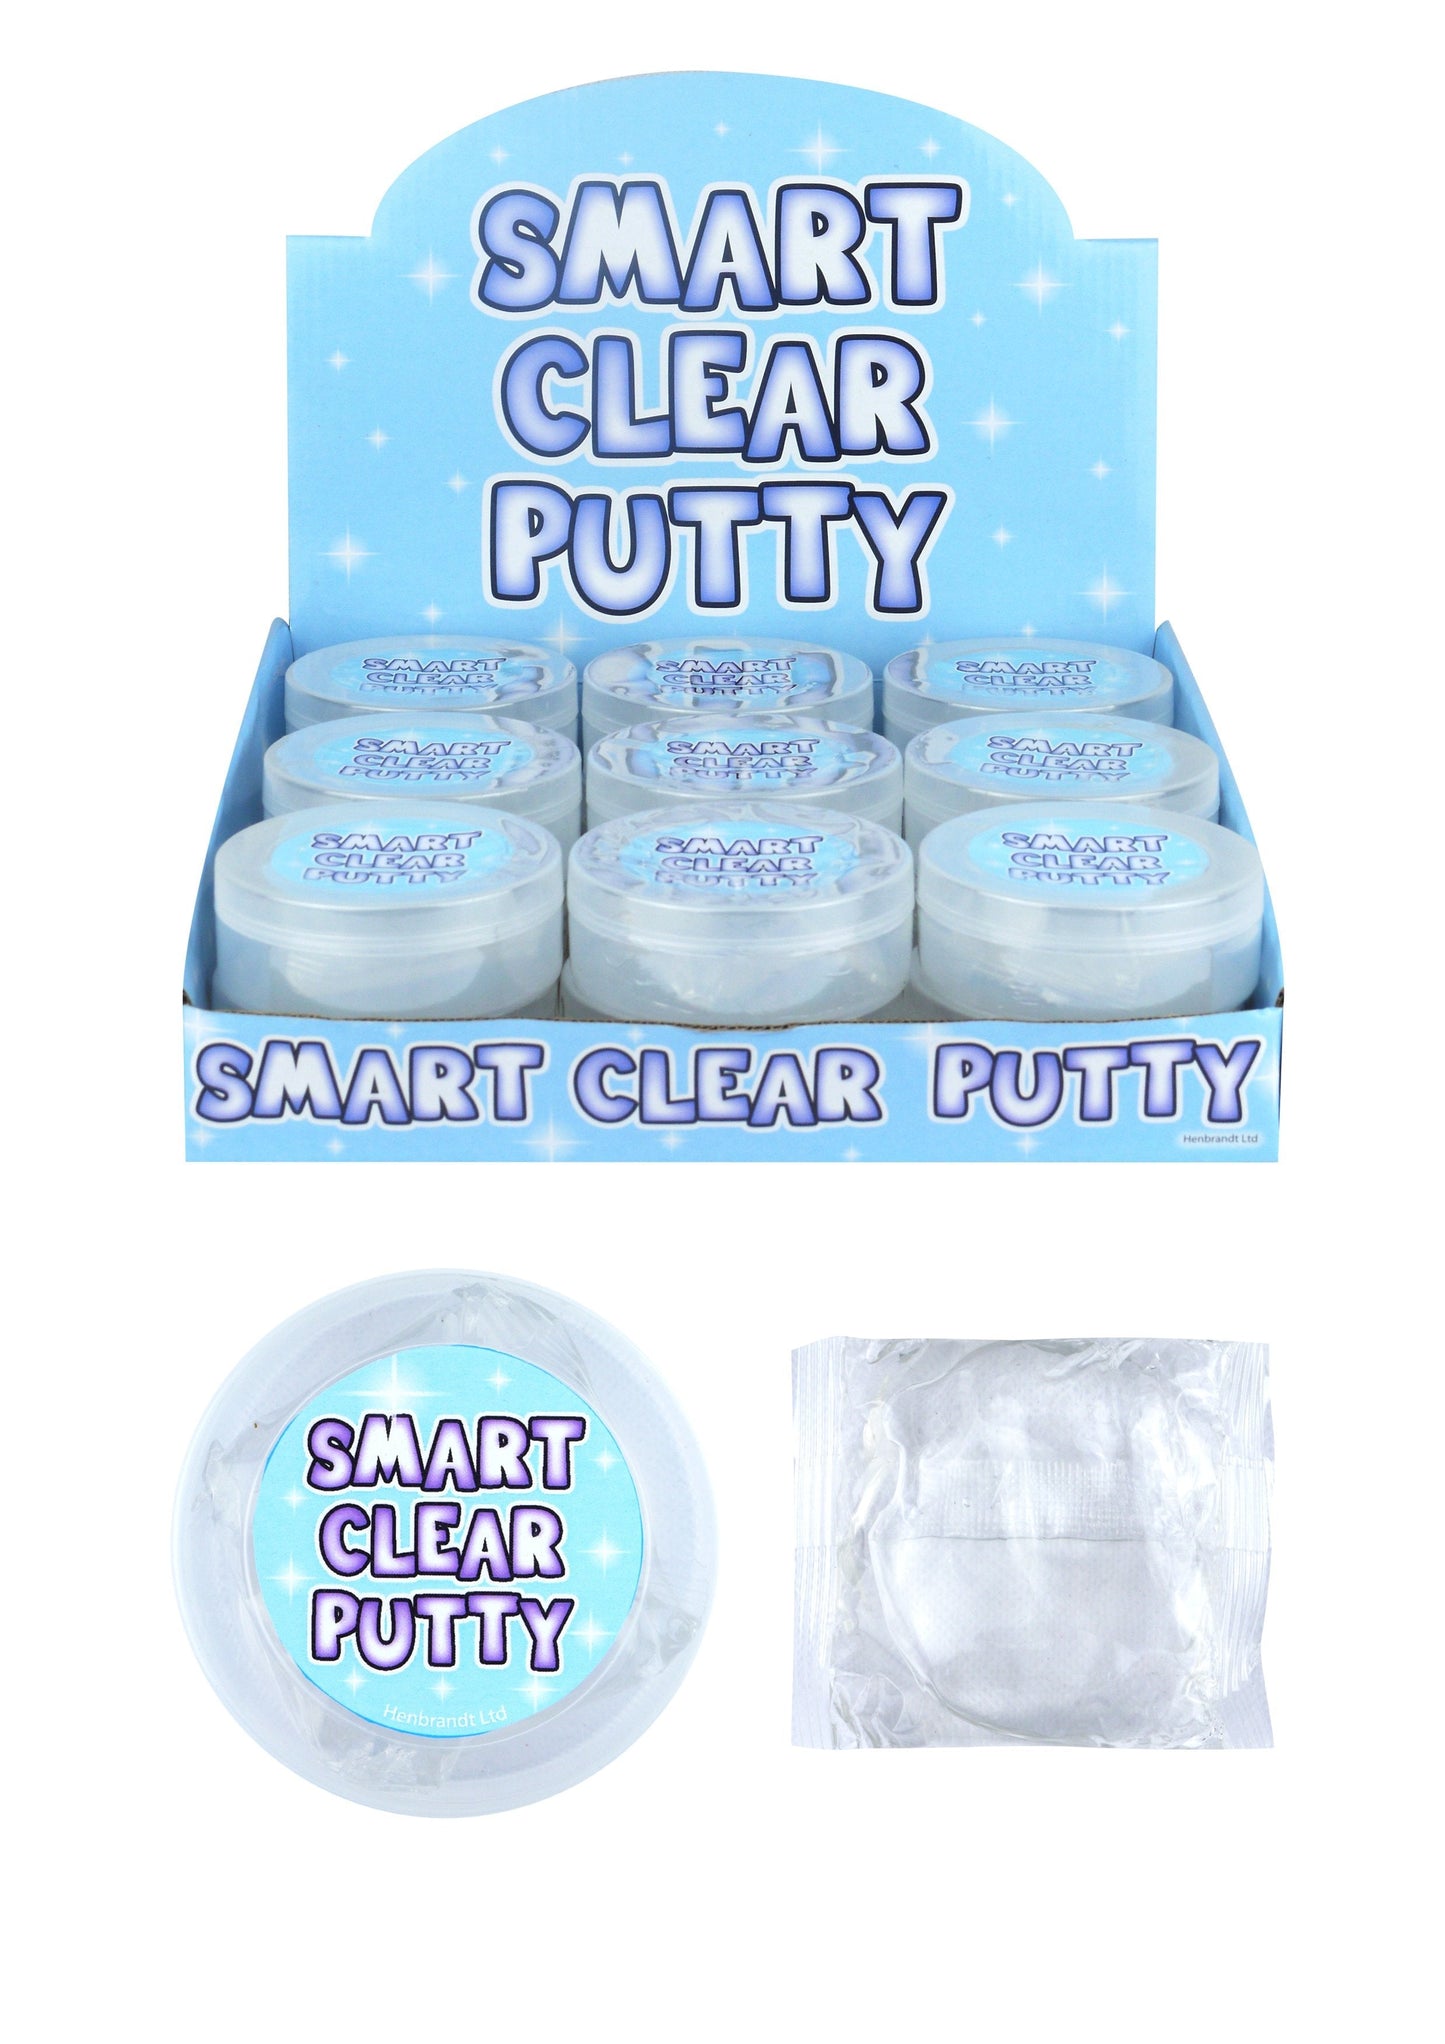 Childrens Fun Slime Putty Clear Smart Slime Putty 8cm x 3cm N14316 (Parcel Rate)